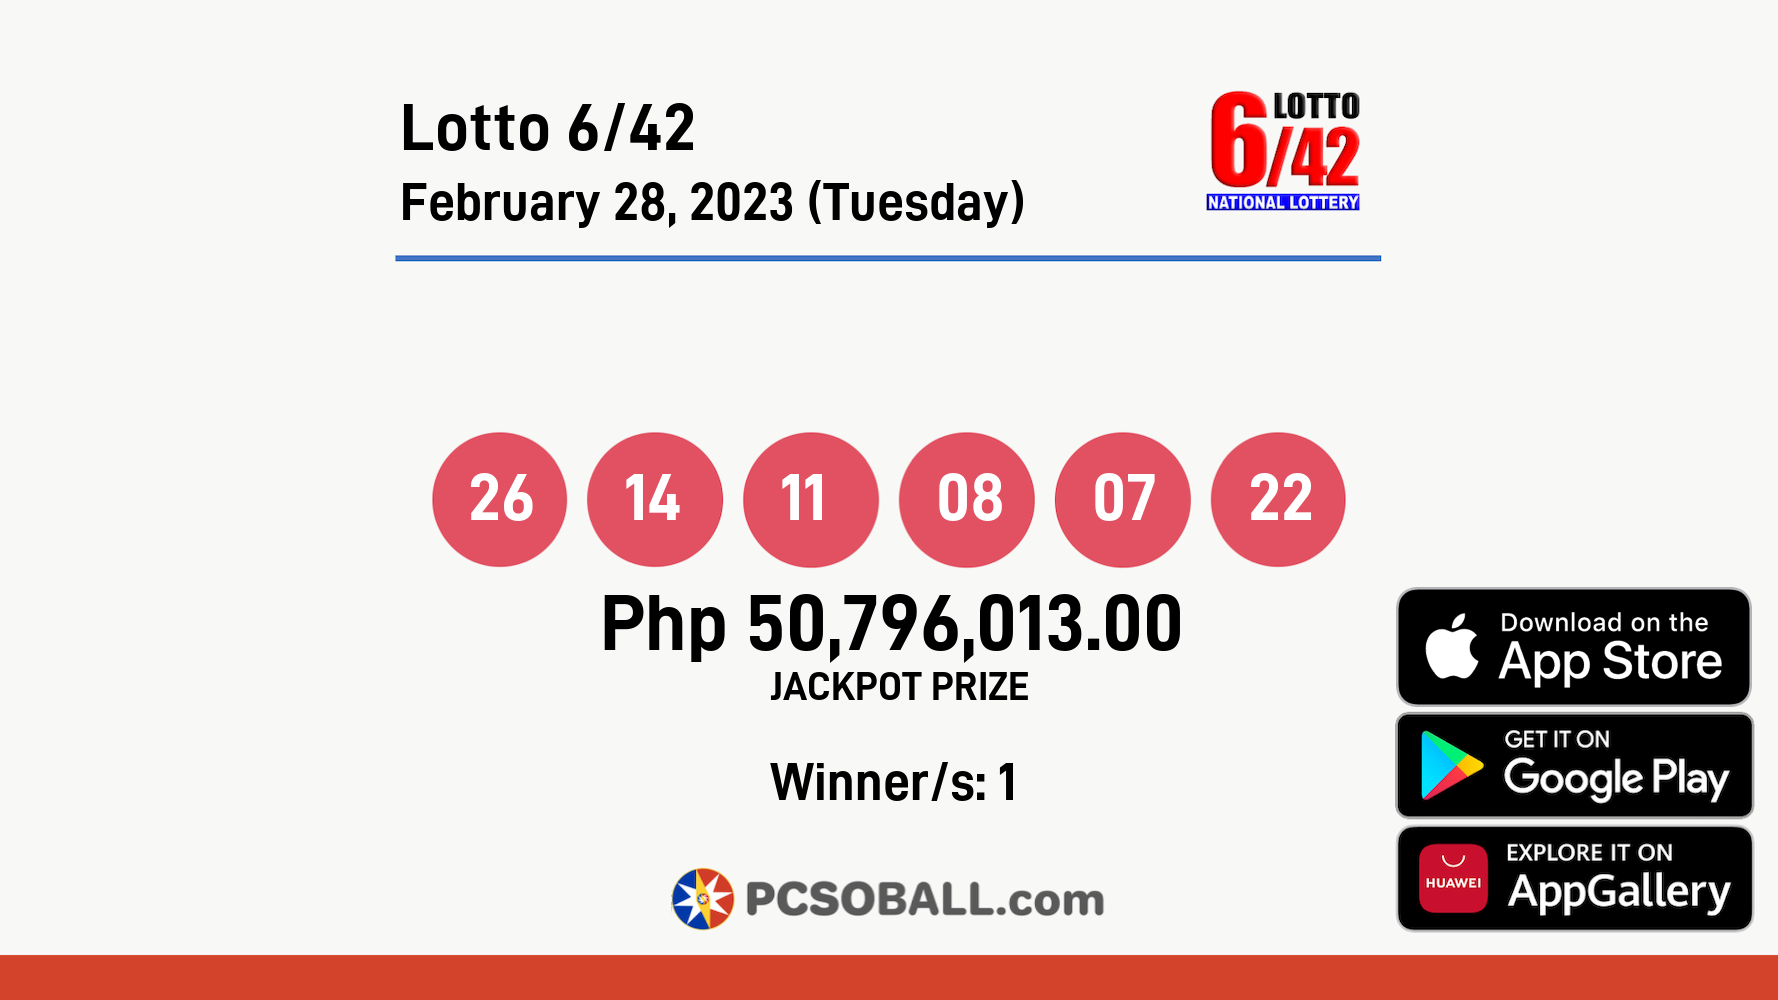 Lotto 6/42 February 28, 2023 (Tuesday) Result